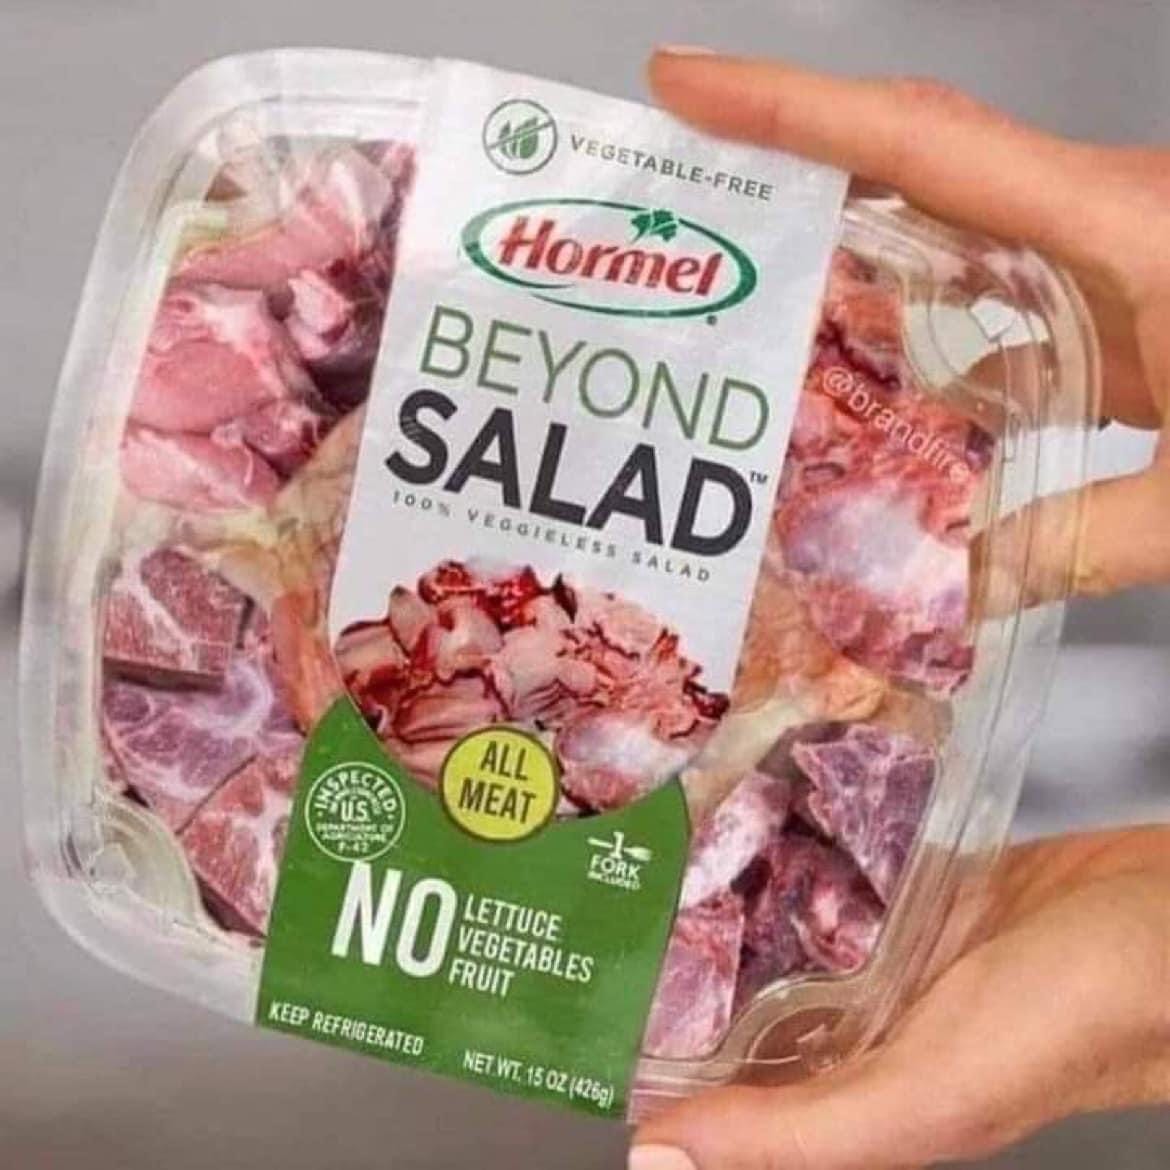 May be an image of text that says "VEGETABLE-FREE Hormel SALAD T™ BEYOND @brsnoin @brandfire randfir 100% VEGGIELESS SALAD ALL MEAT Ho NO FRUIT VEGETABLES LETTUCE FORK KEEP REFRIGERATED REFRIGERATED S 150Z 425g)"